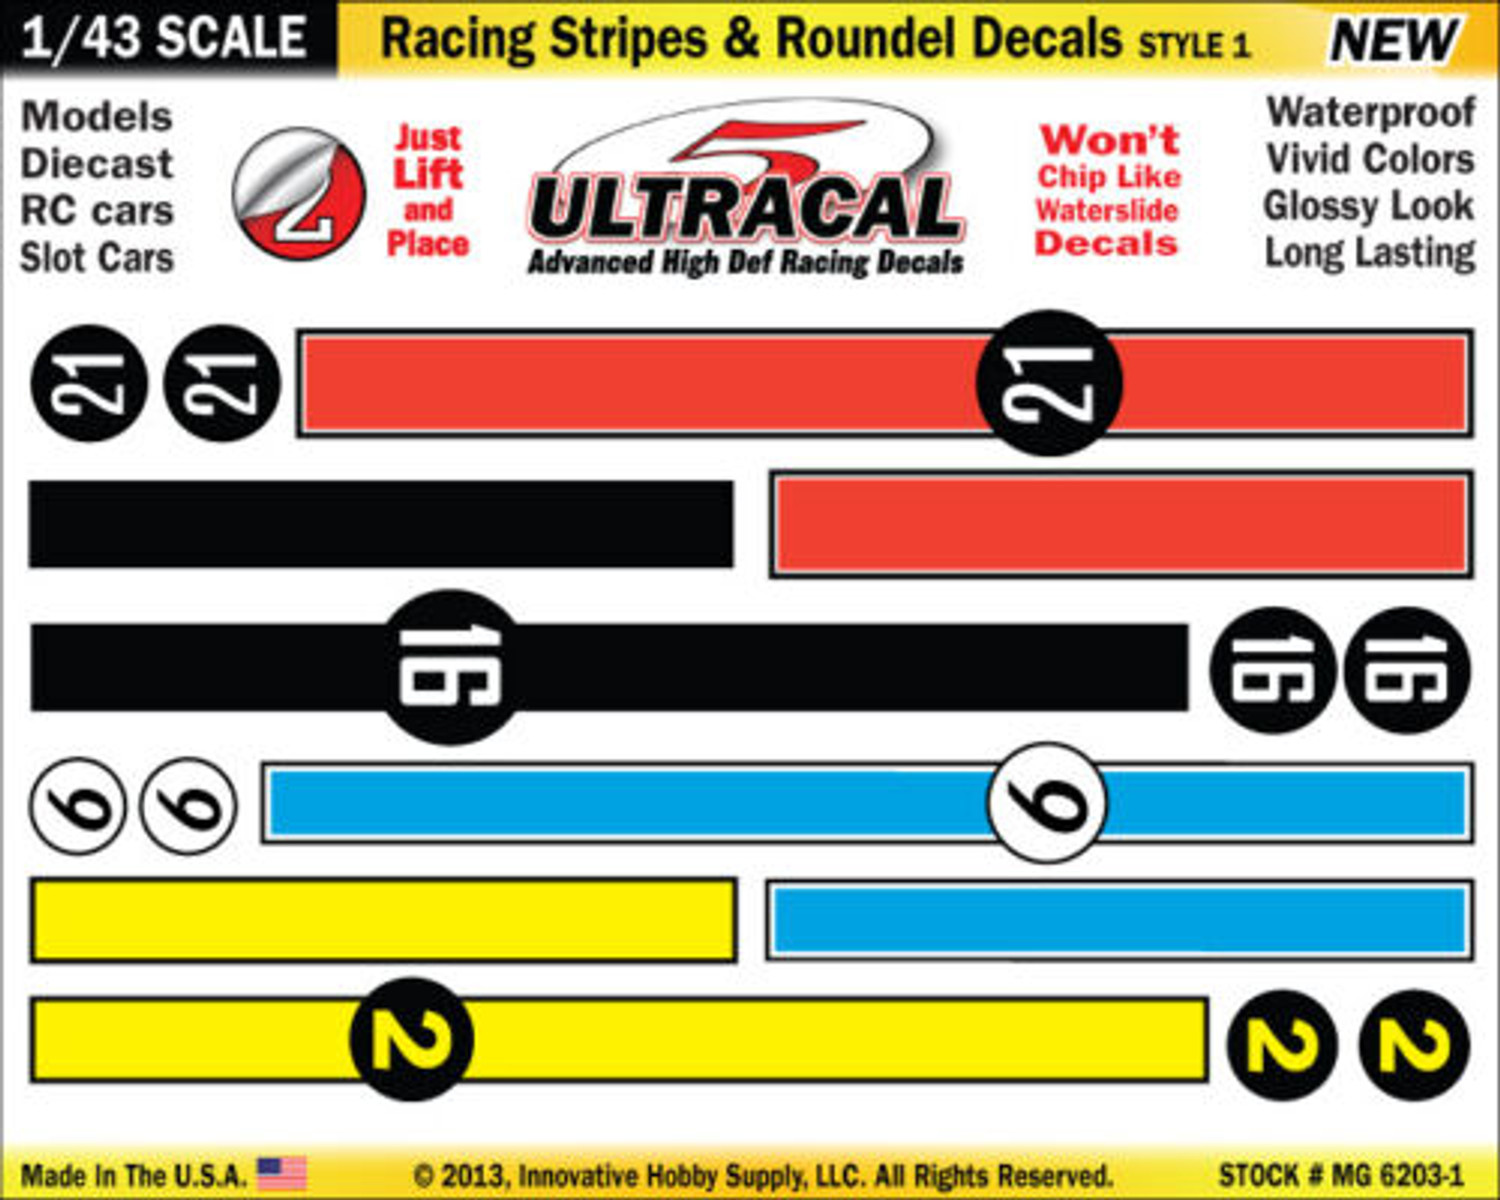 MG 6203-1 UltraCal Stripes & Roundel Decals Style 1 1:43 Scale